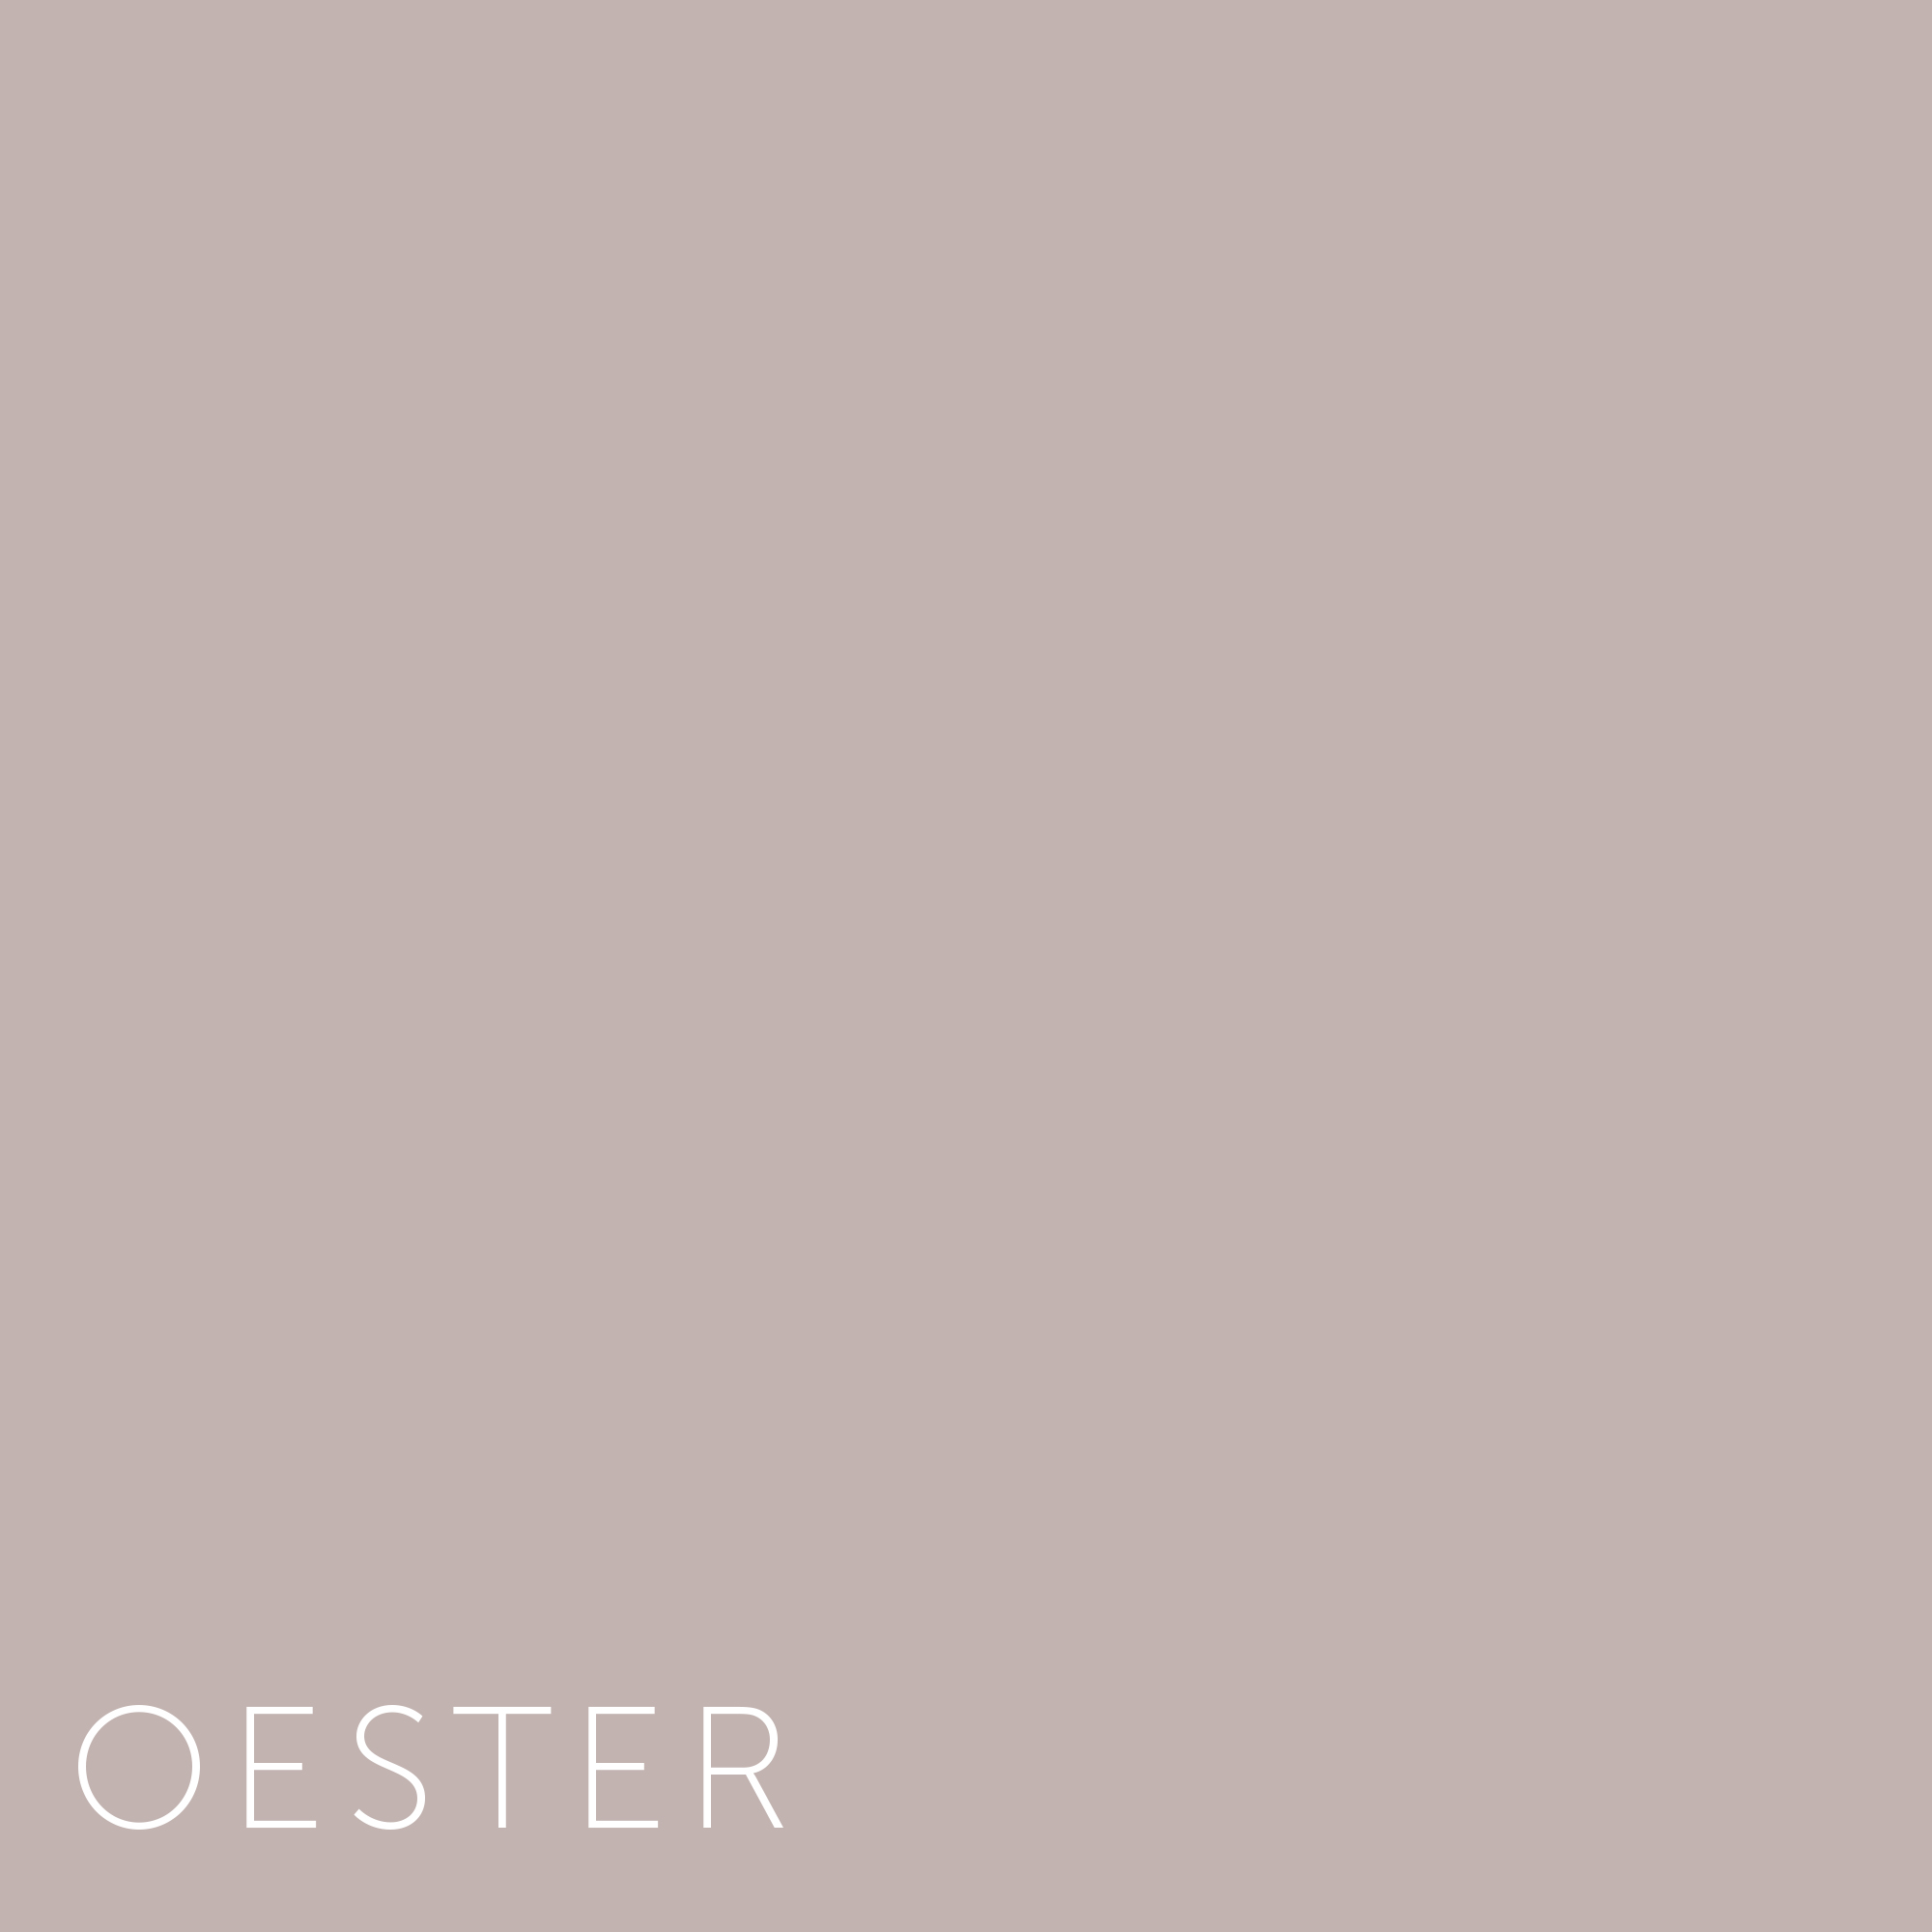 Verf - Oester | Made By